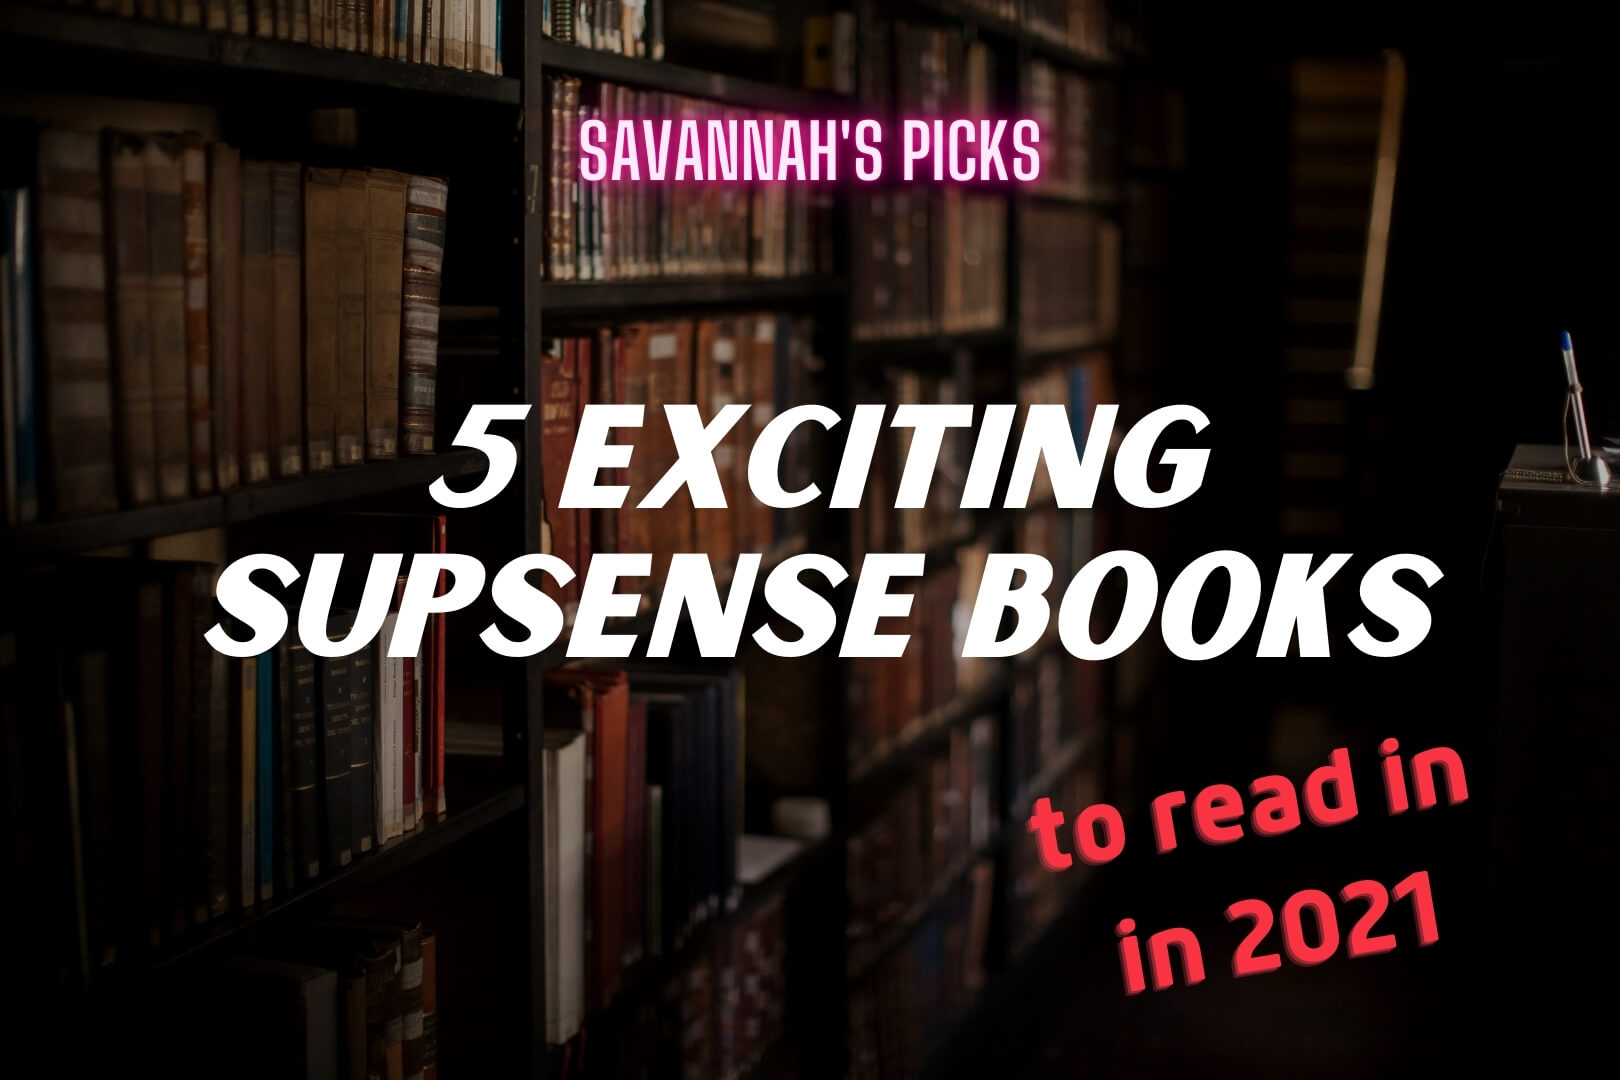 5 Exciting Suspense Books to Read in 2021